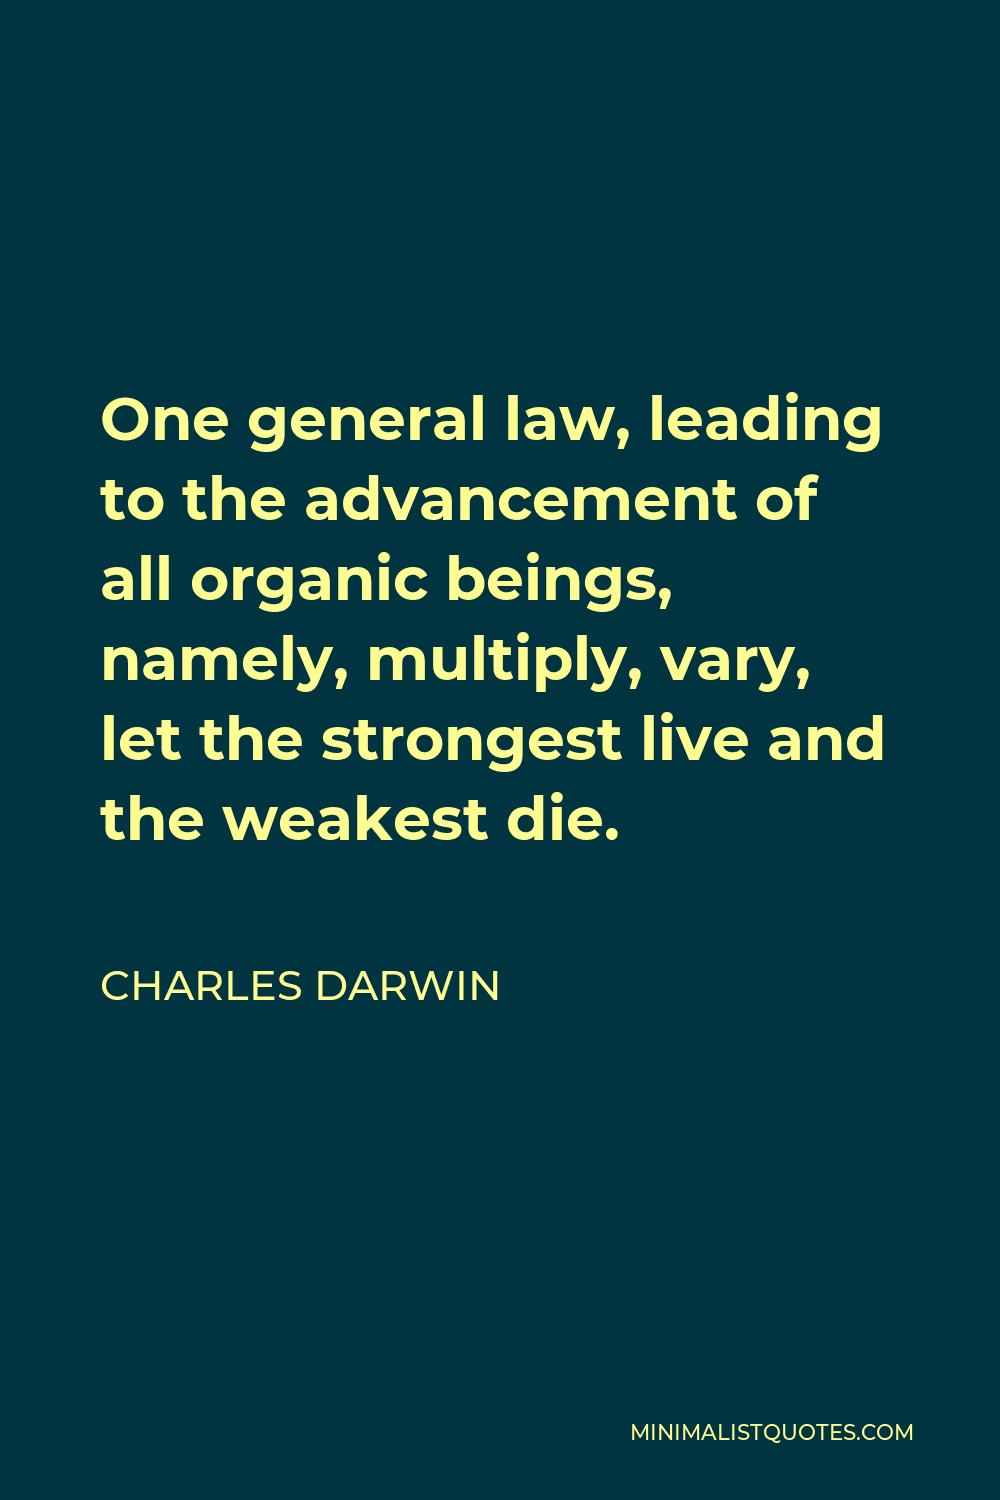 Charles Darwin Quote - One general law, leading to the advancement of all organic beings, namely, multiply, vary, let the strongest live and the weakest die.